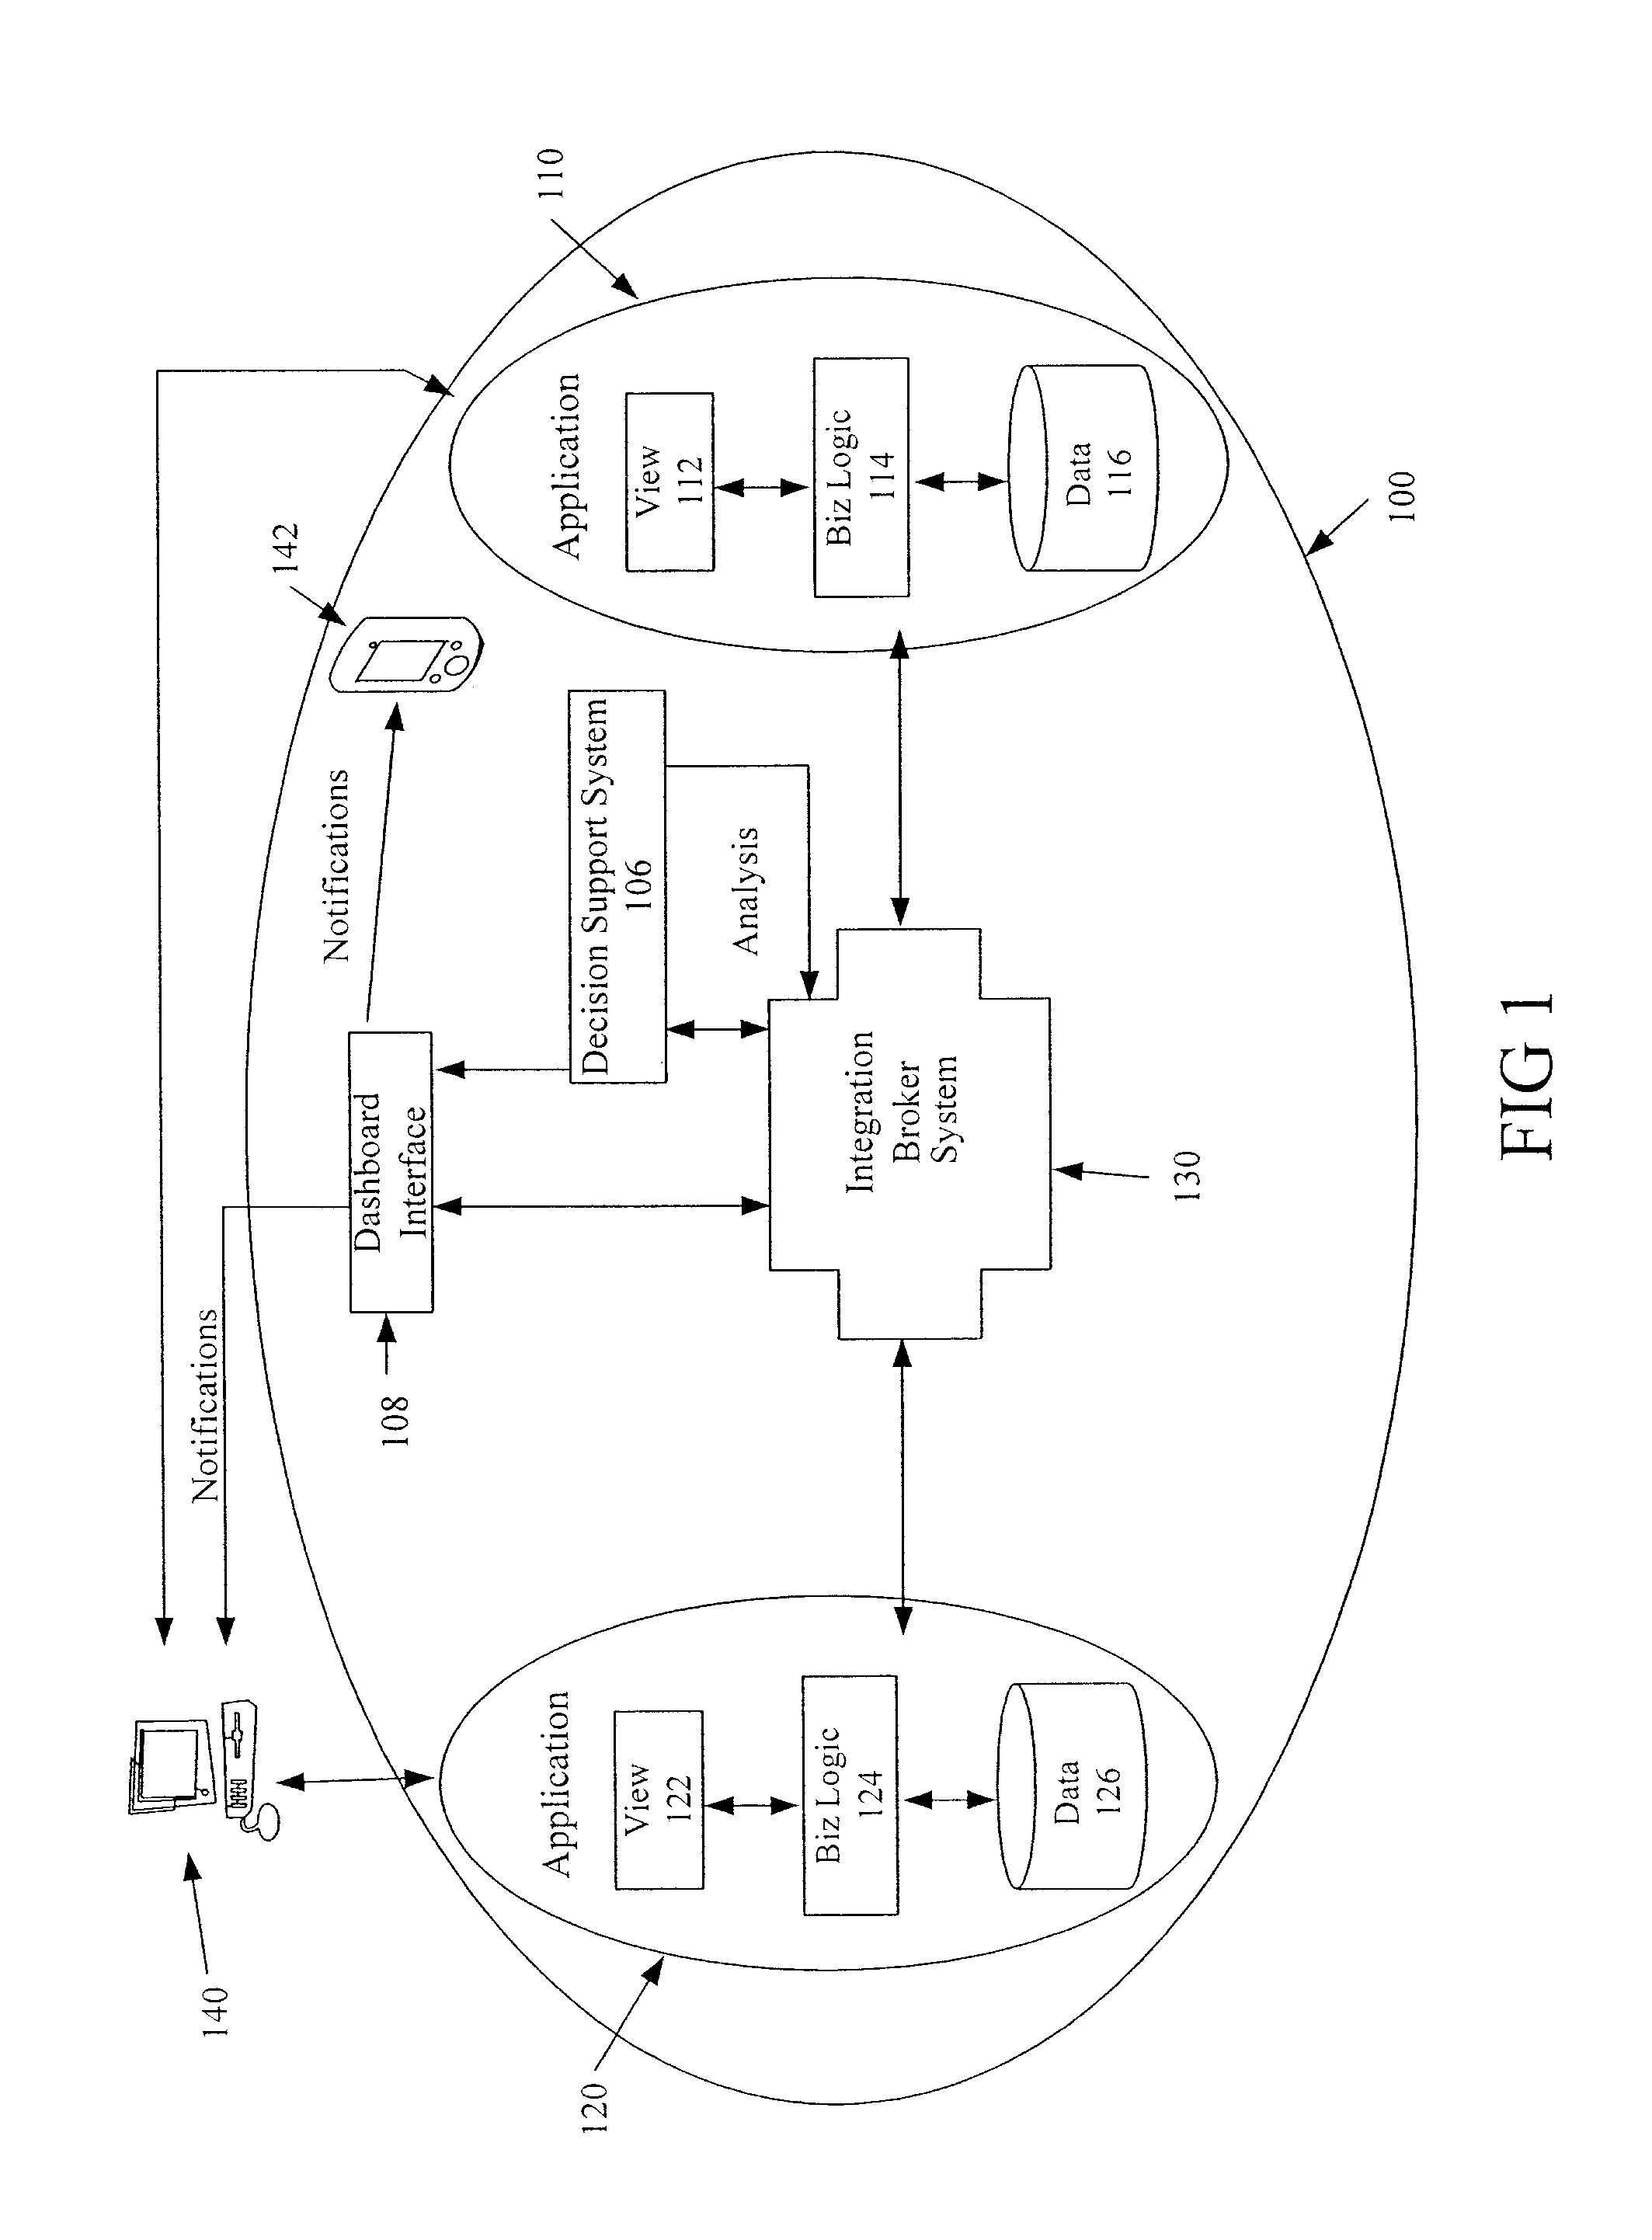 Methods and systems for providing a global view of airline operations